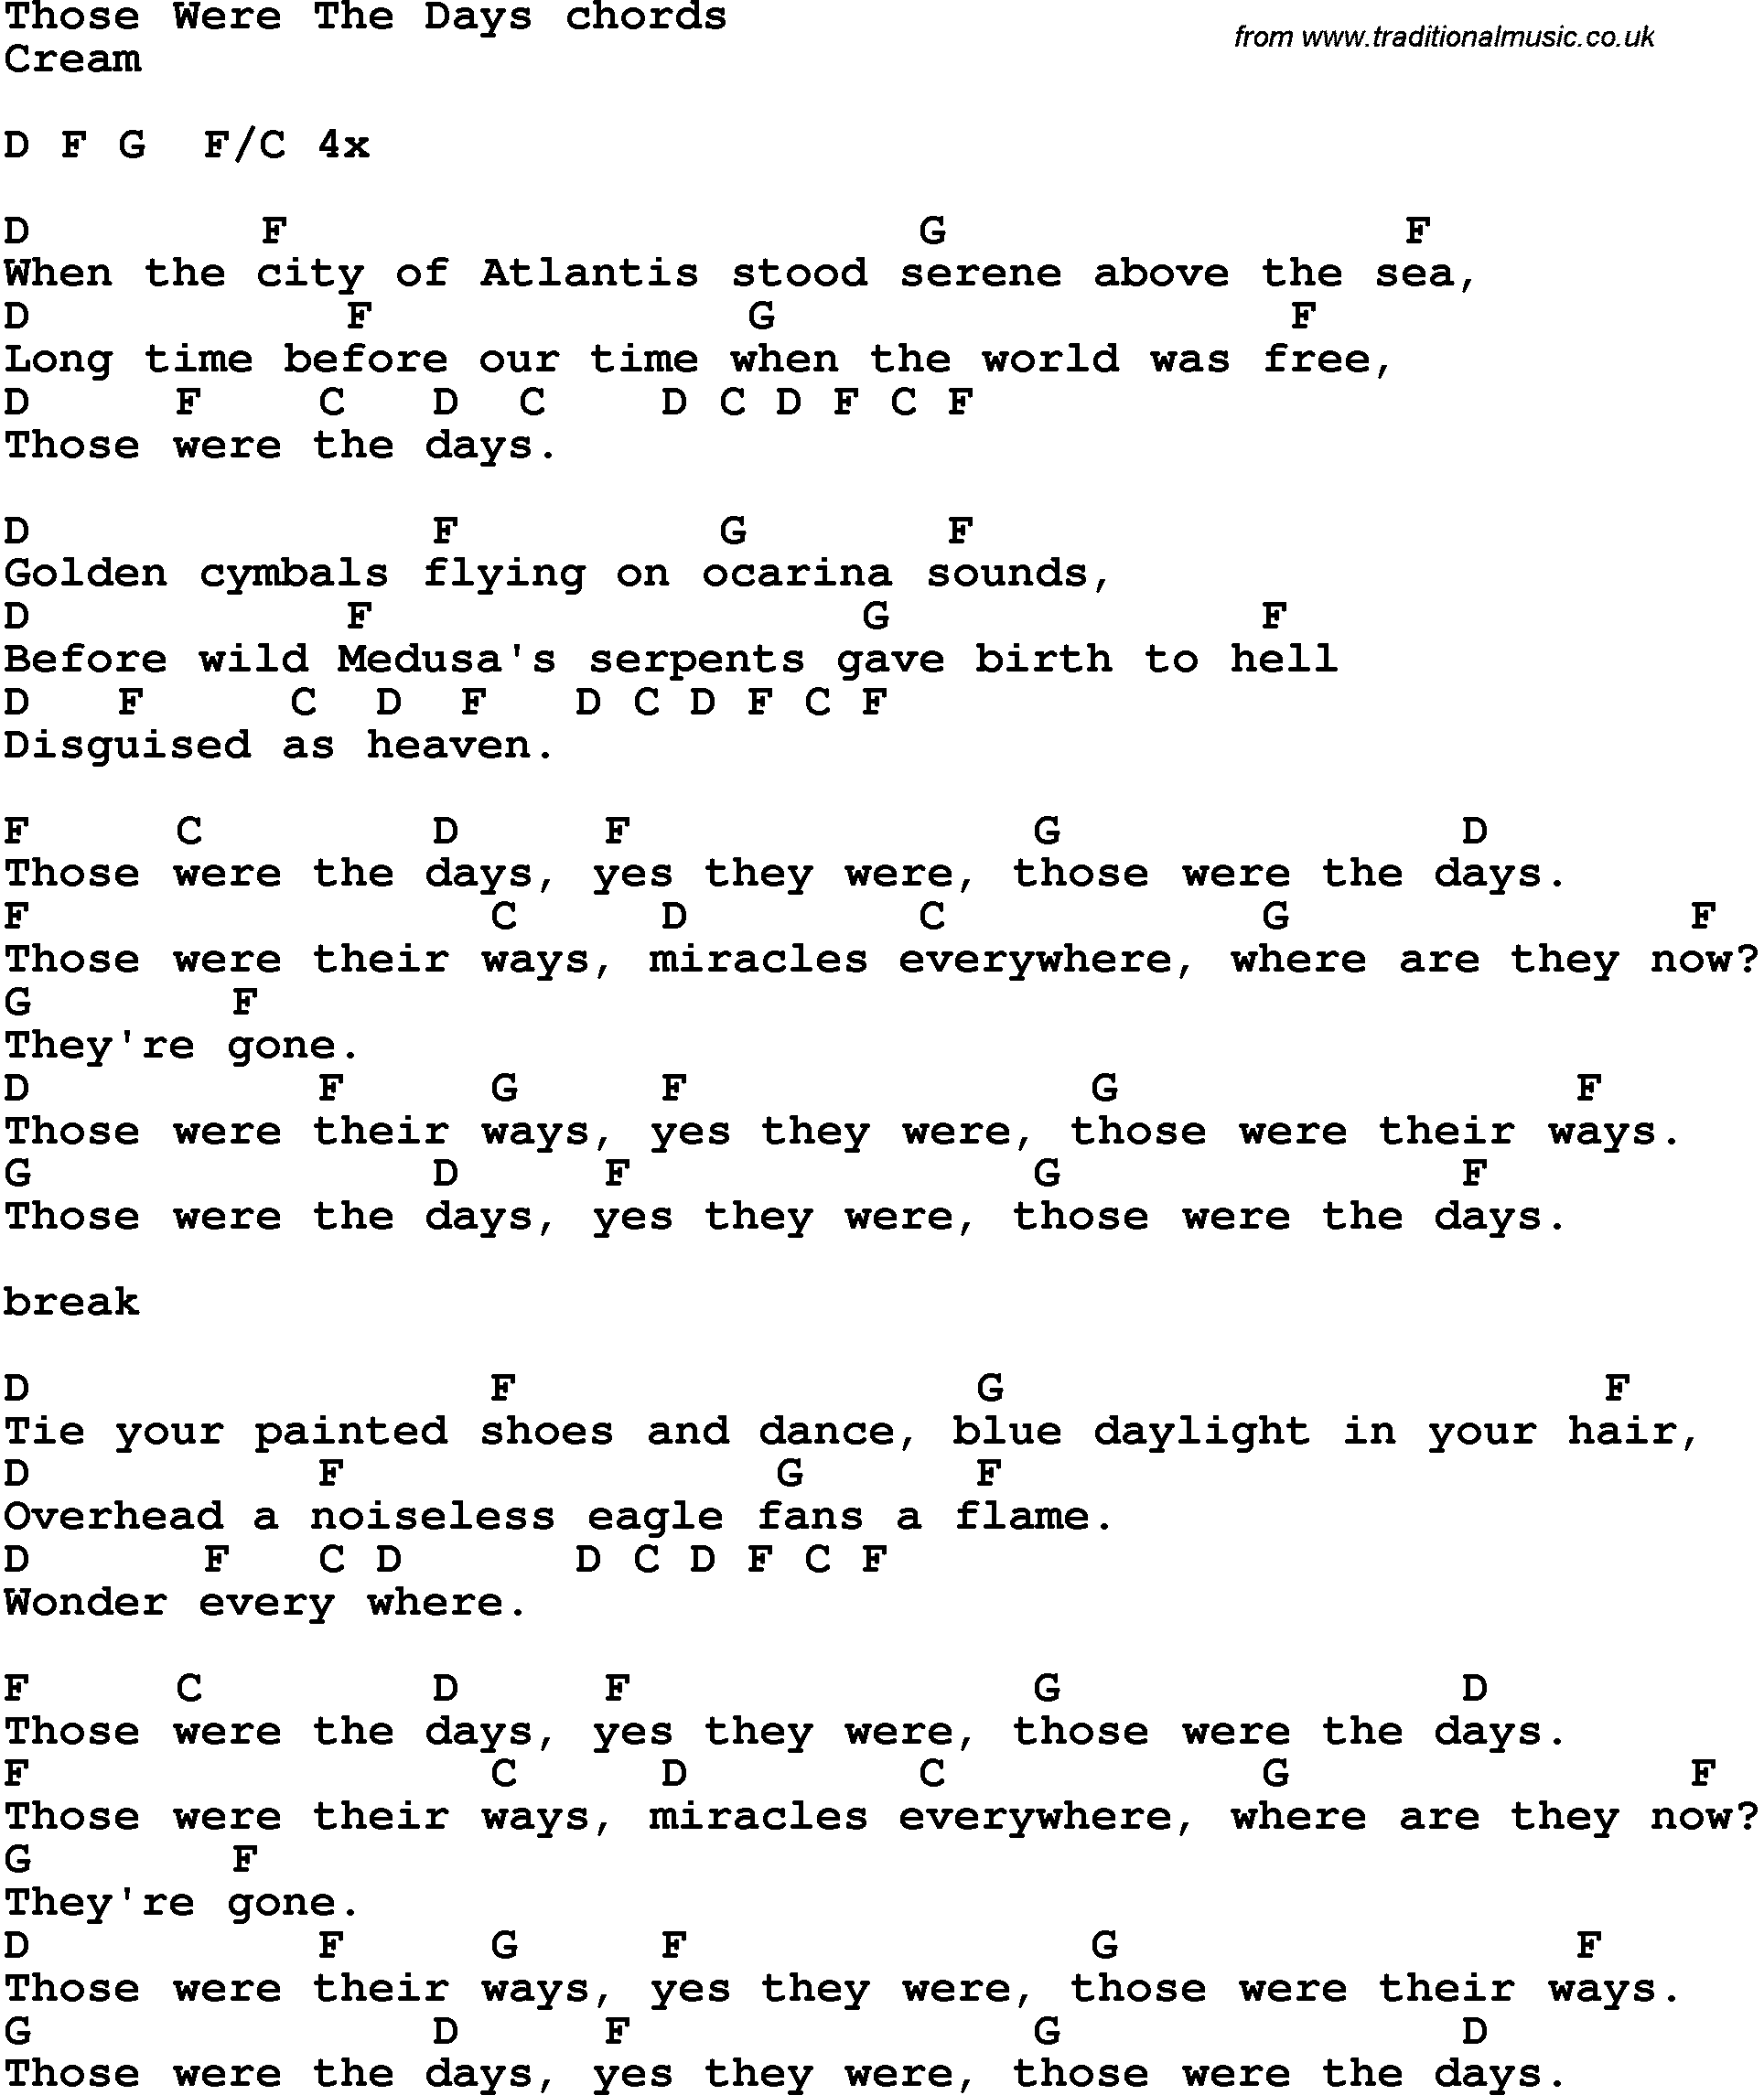 Song Lyrics with guitar chords for Those Were The Days - Cream